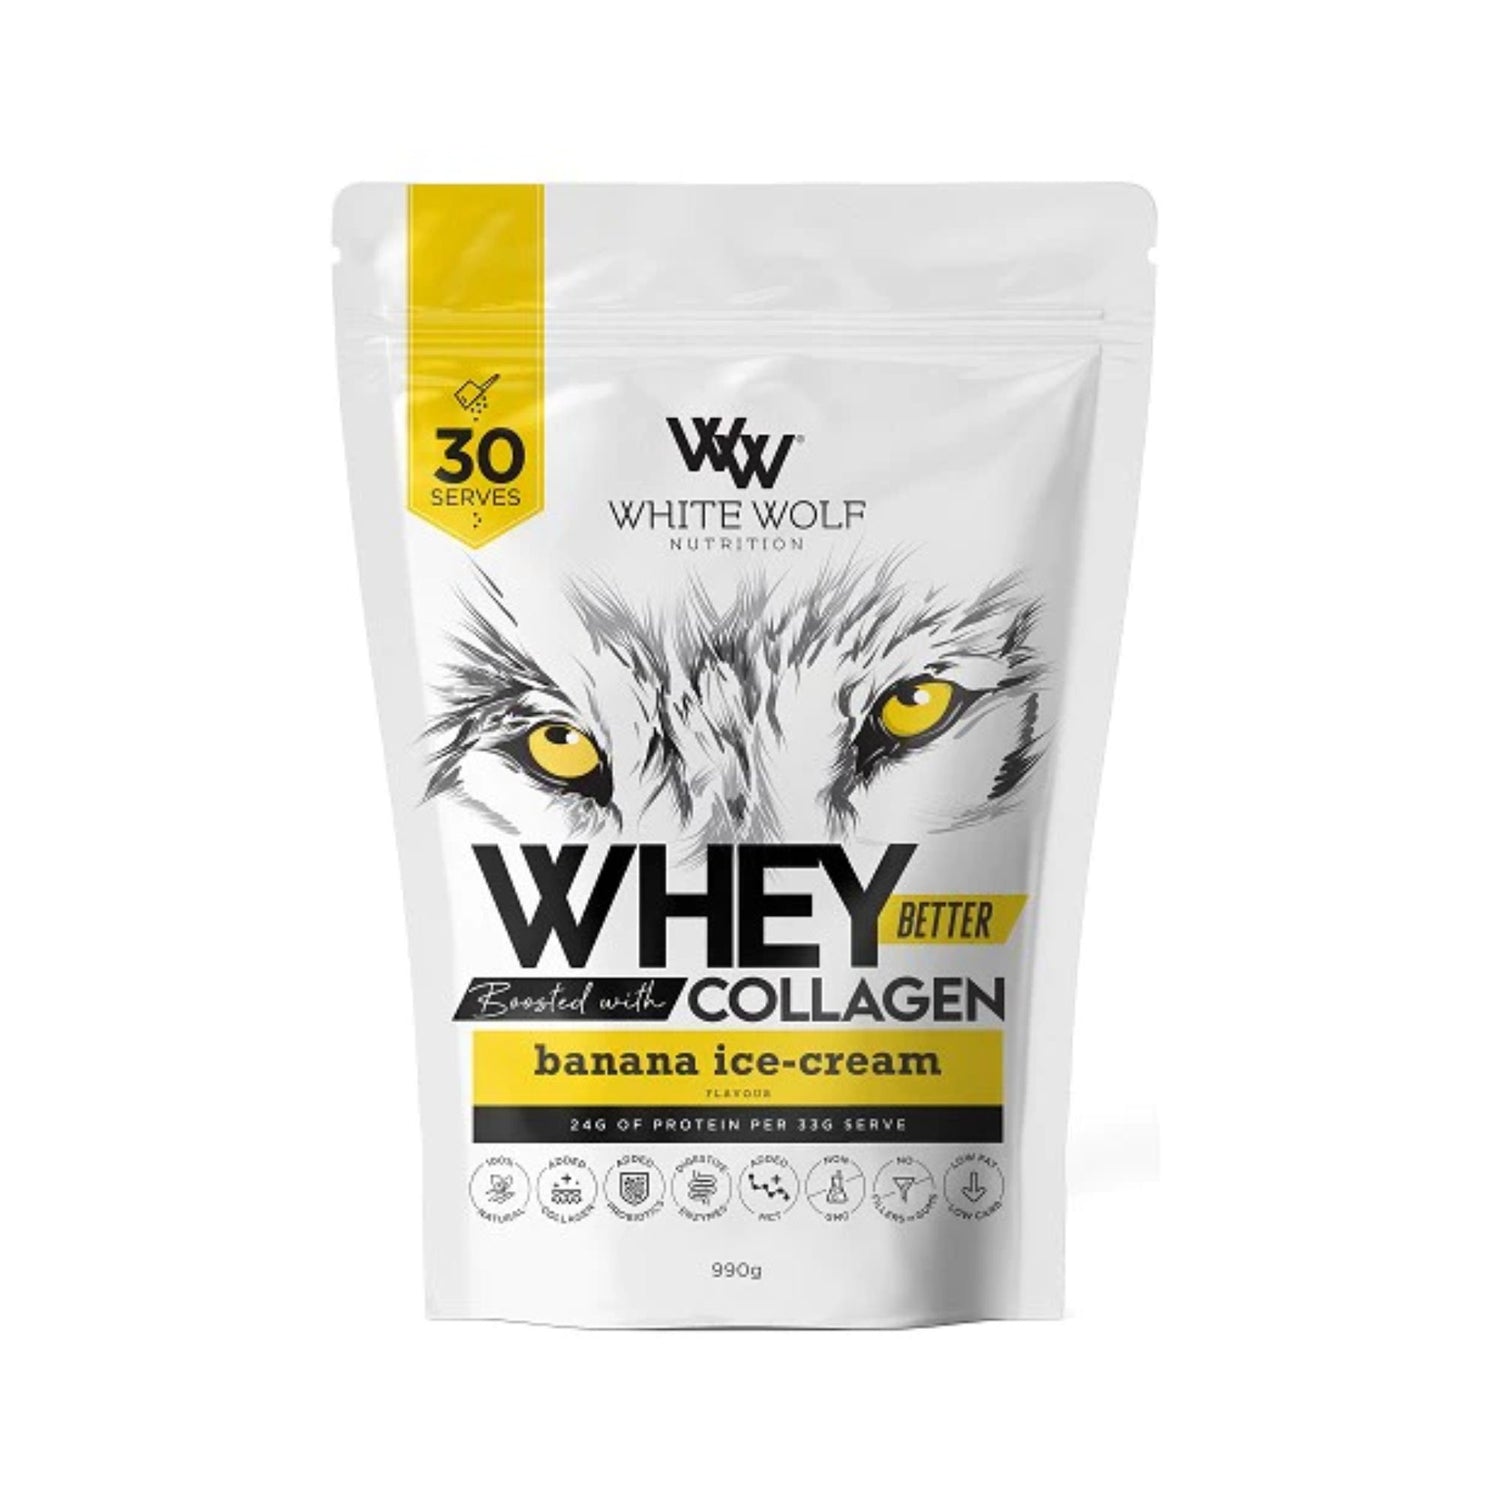 White Wolf Whey Better Protein Blend - Boosted with Collagen Protein Powder